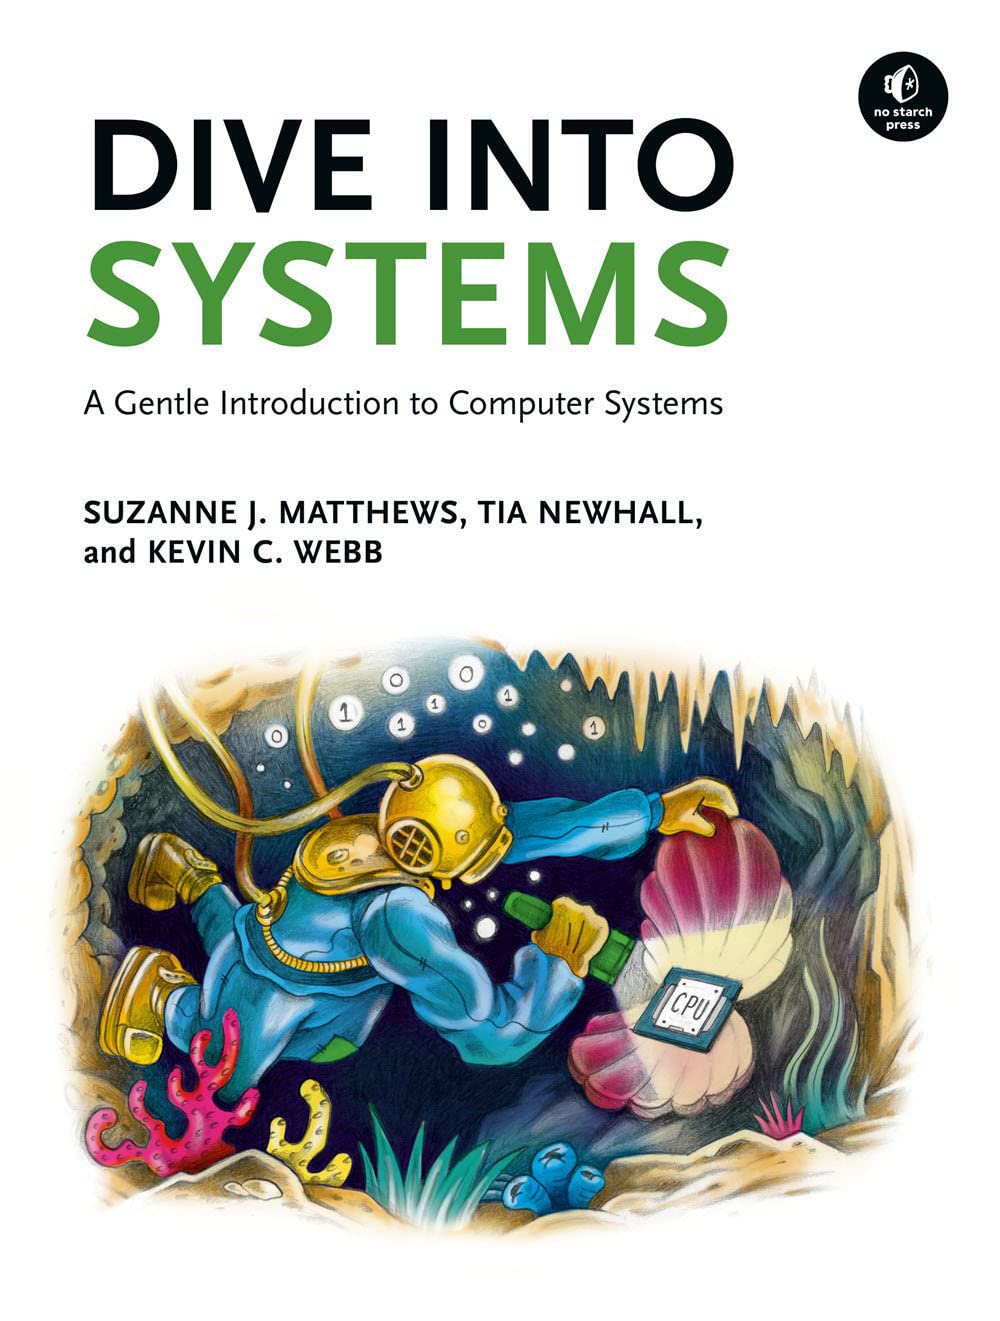 Dive Into Systems: A Gentle Introduction to Computer Systems by Suzanne J. Matthews